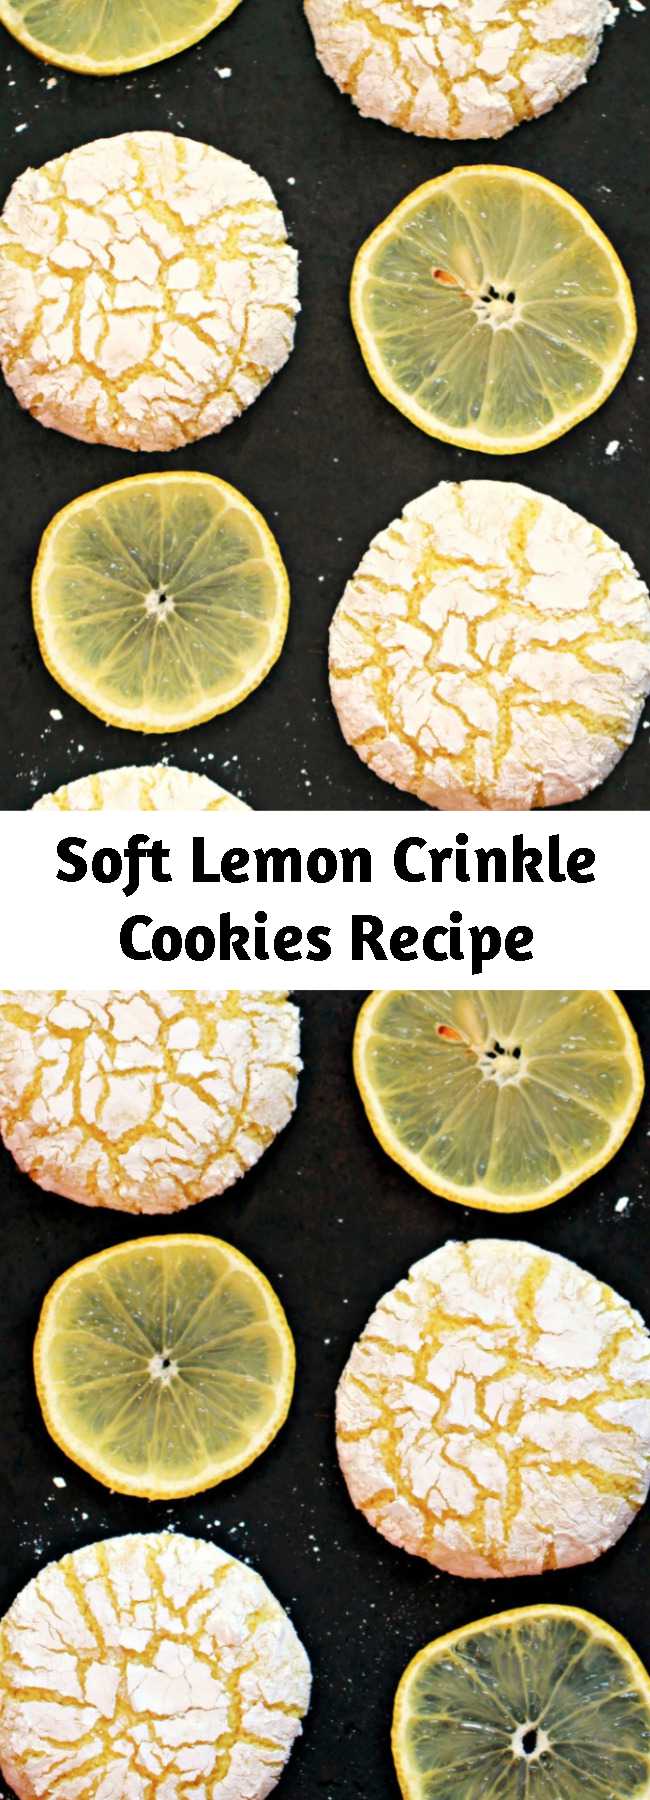 Soft Lemon Crinkle Cookies Recipe - These melt-in-your-mouth Lemon Crinkle Cookies are absolutely dreamy. This cookie recipe is one of my favourites, I could have these for dessert everyday and be happy!